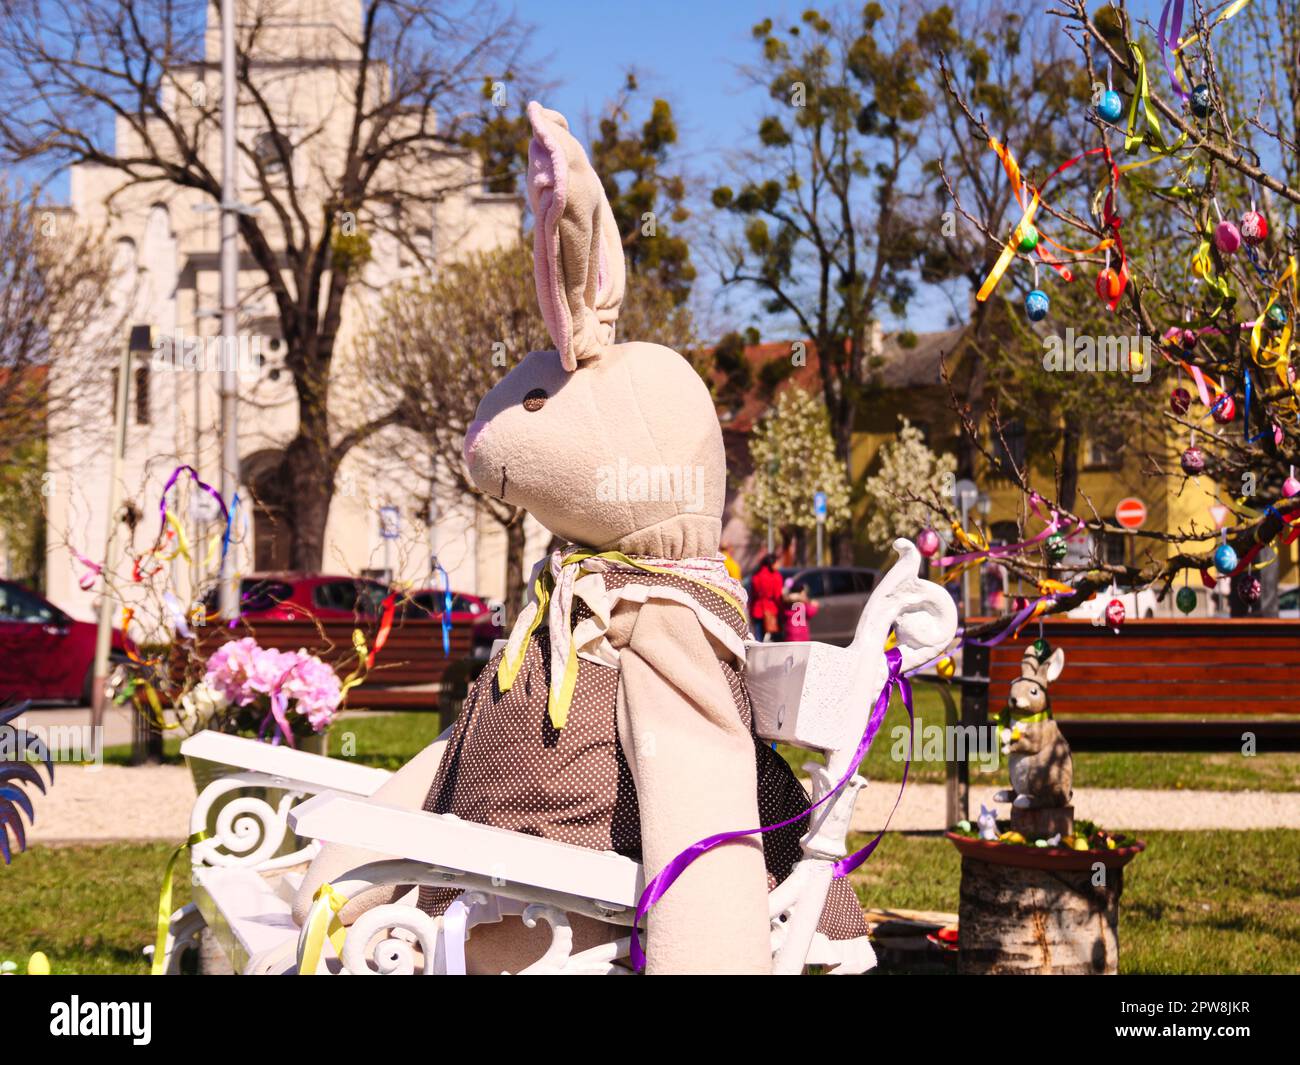 Happy Easter holiday in spring season with bunny decoration on a white bench . Colorful blurred background includes trees , green grass , people and... Stock Photo